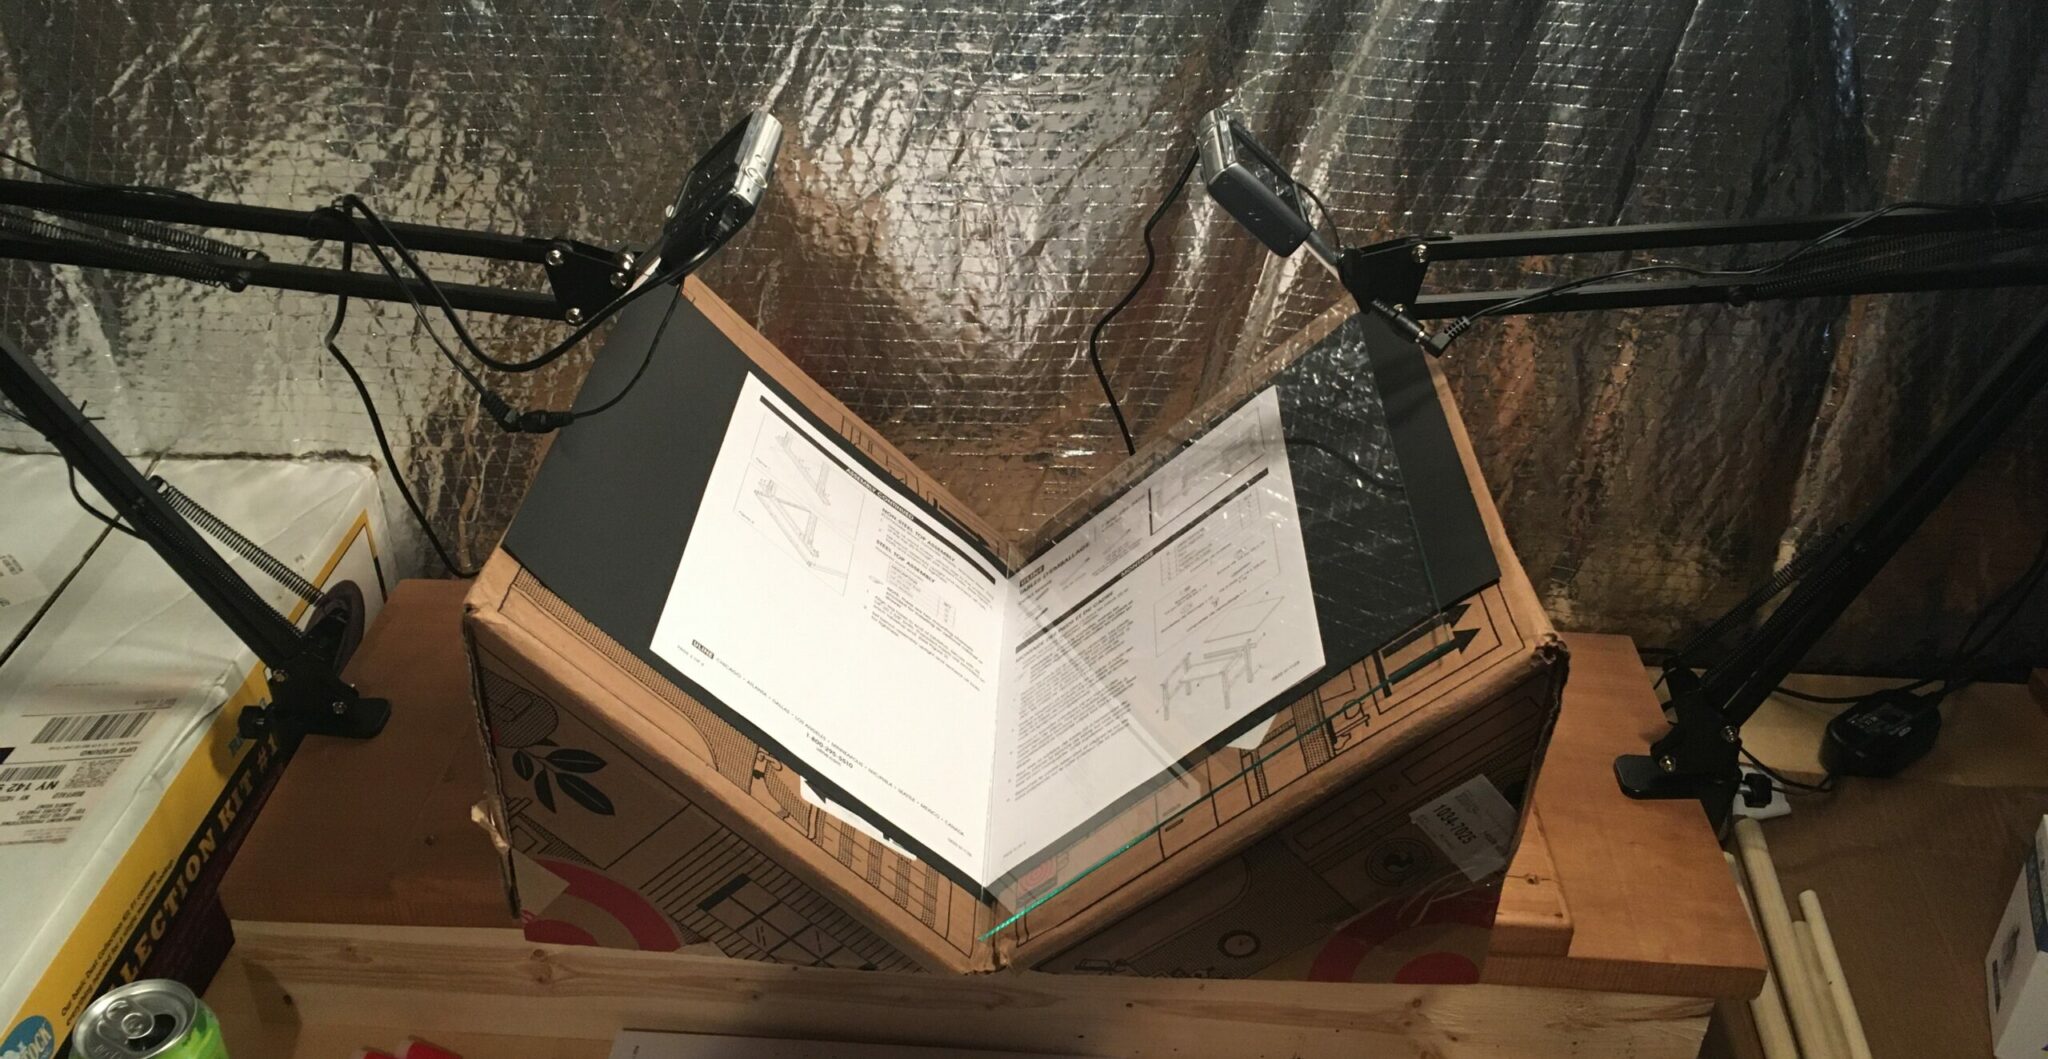 A close-up photograph of the book scanning rig, which is currently a cardboard box cut into the shape of a lectern, and two digital photography cameras on articulated arms, each pointed at one page of the open book, as it sits on the rig.